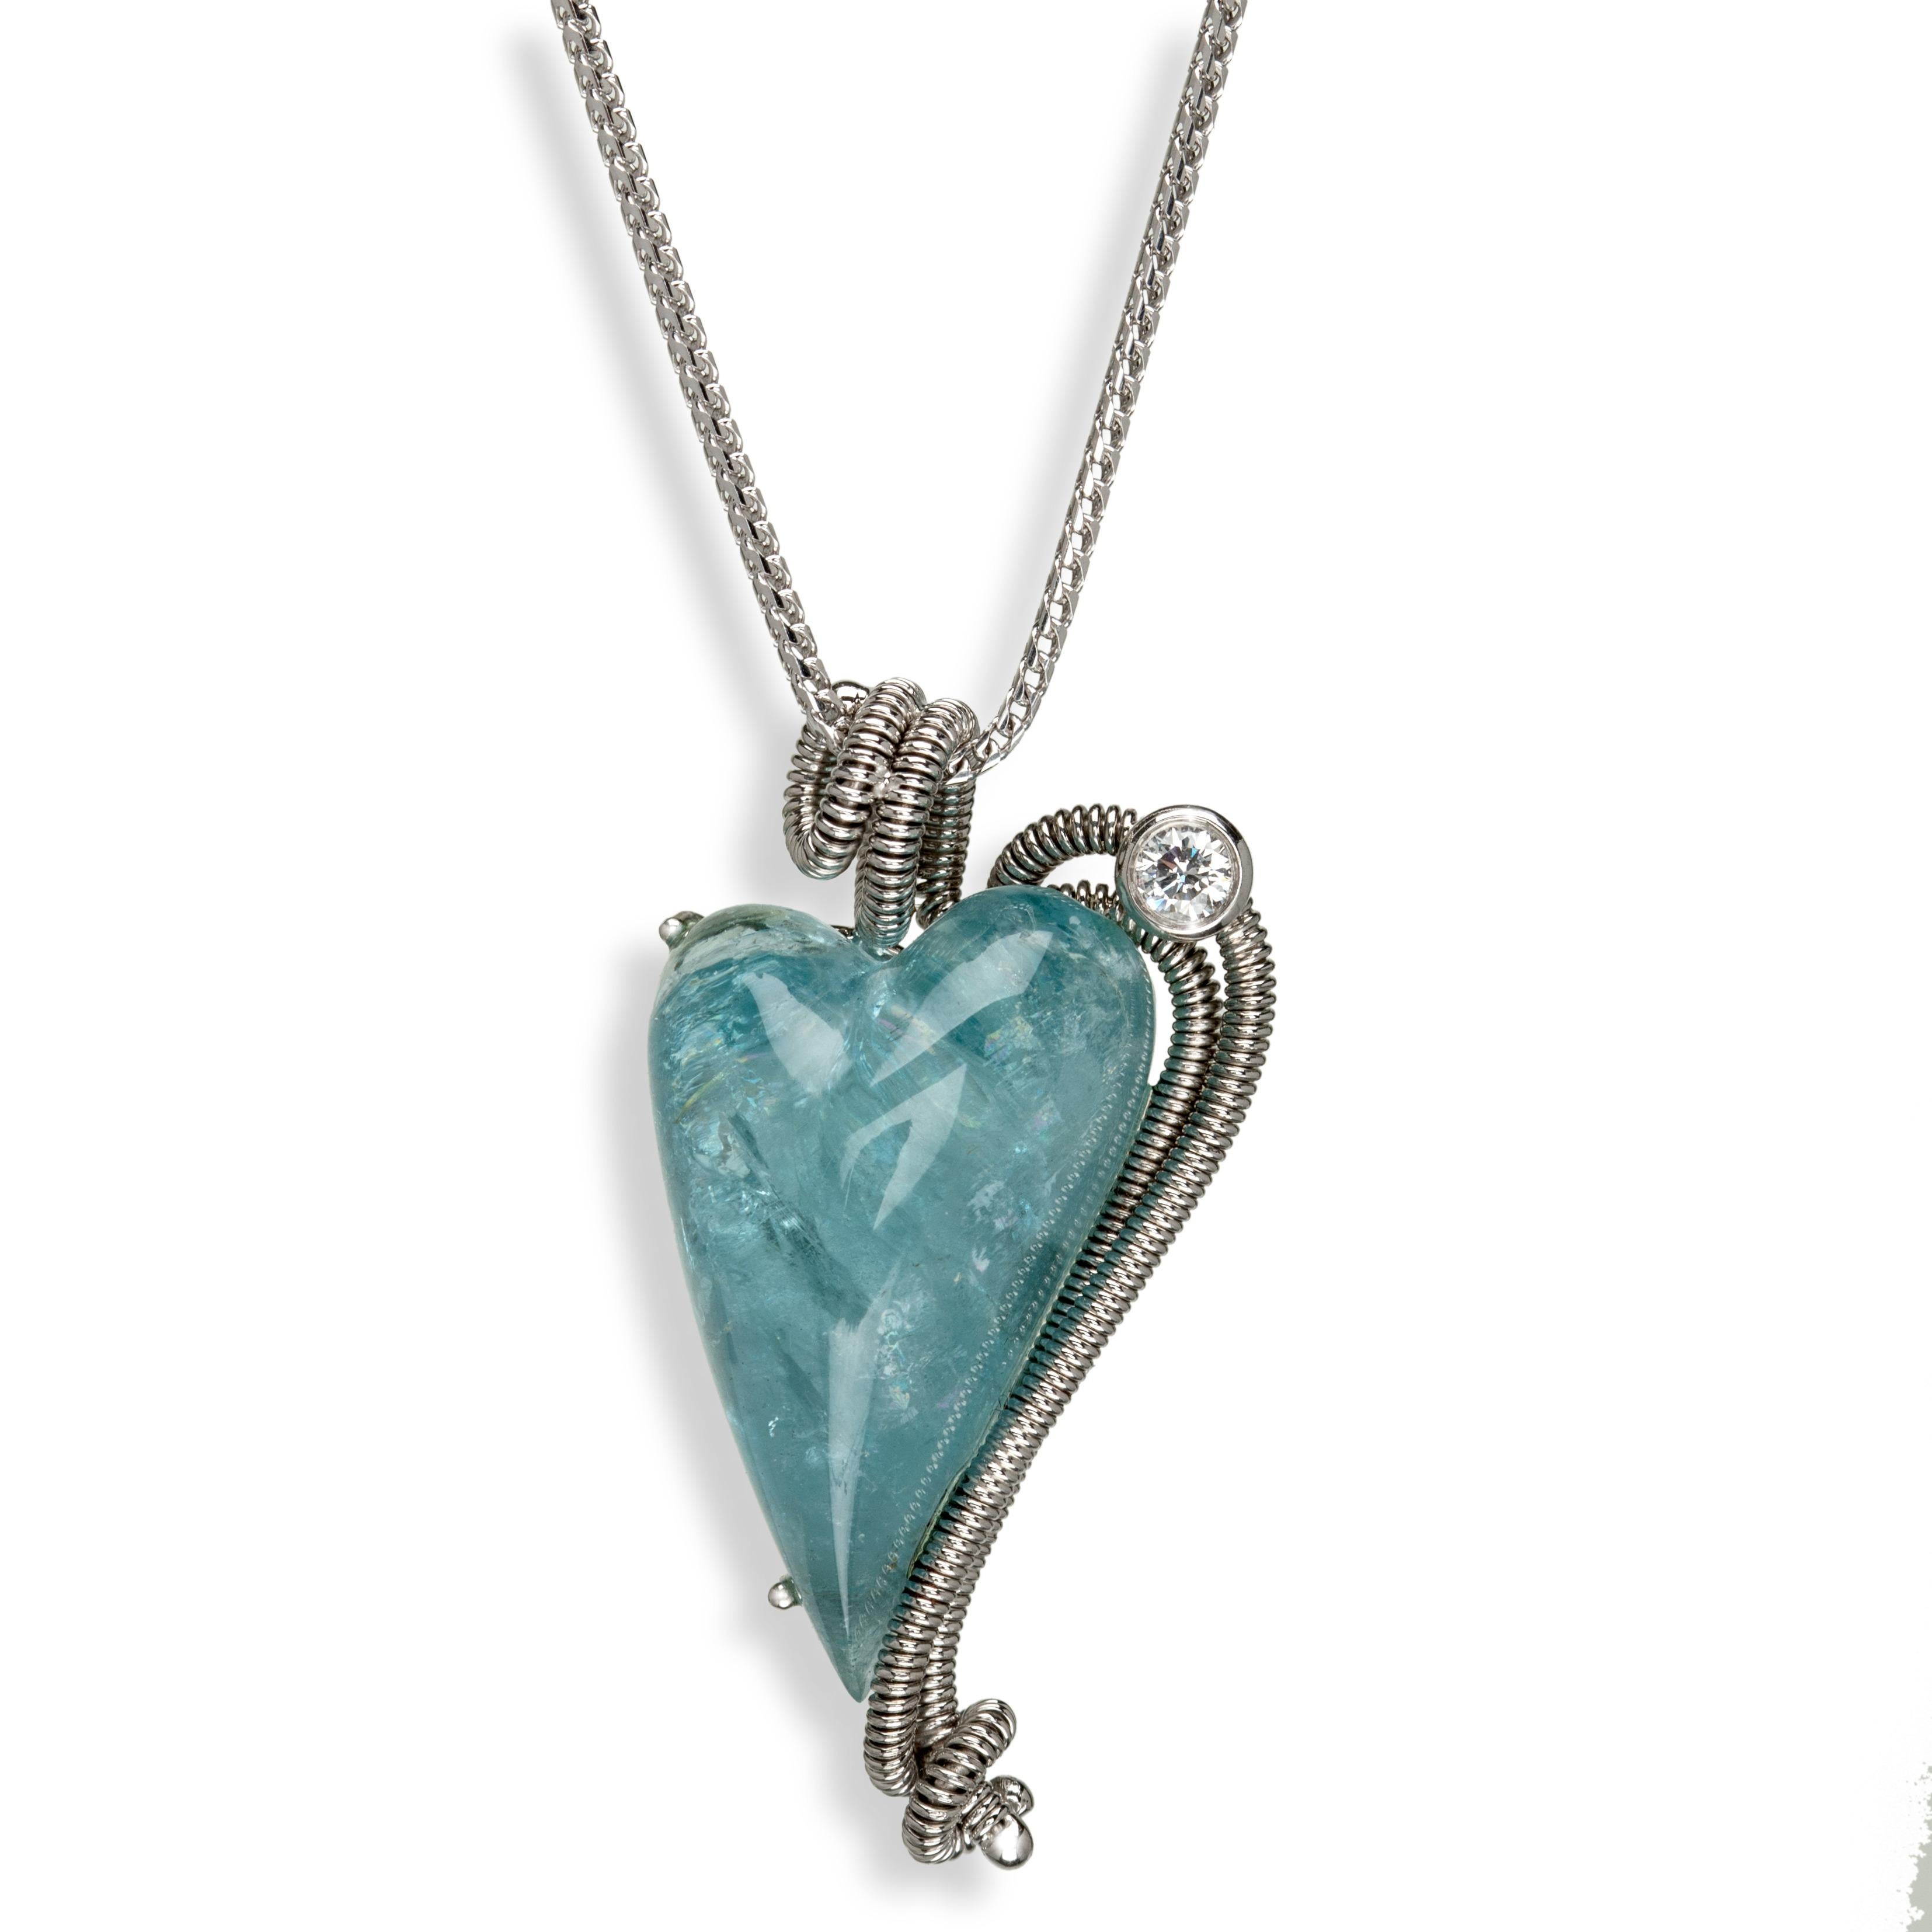 The shape of your heart is unmistakable in this visually appealing heart shaped aquamarine cabochon stone, set in Gloria’s signature coil work made from 18k white gold and beset with a sparkling diamond for added shine. What better way to say I love